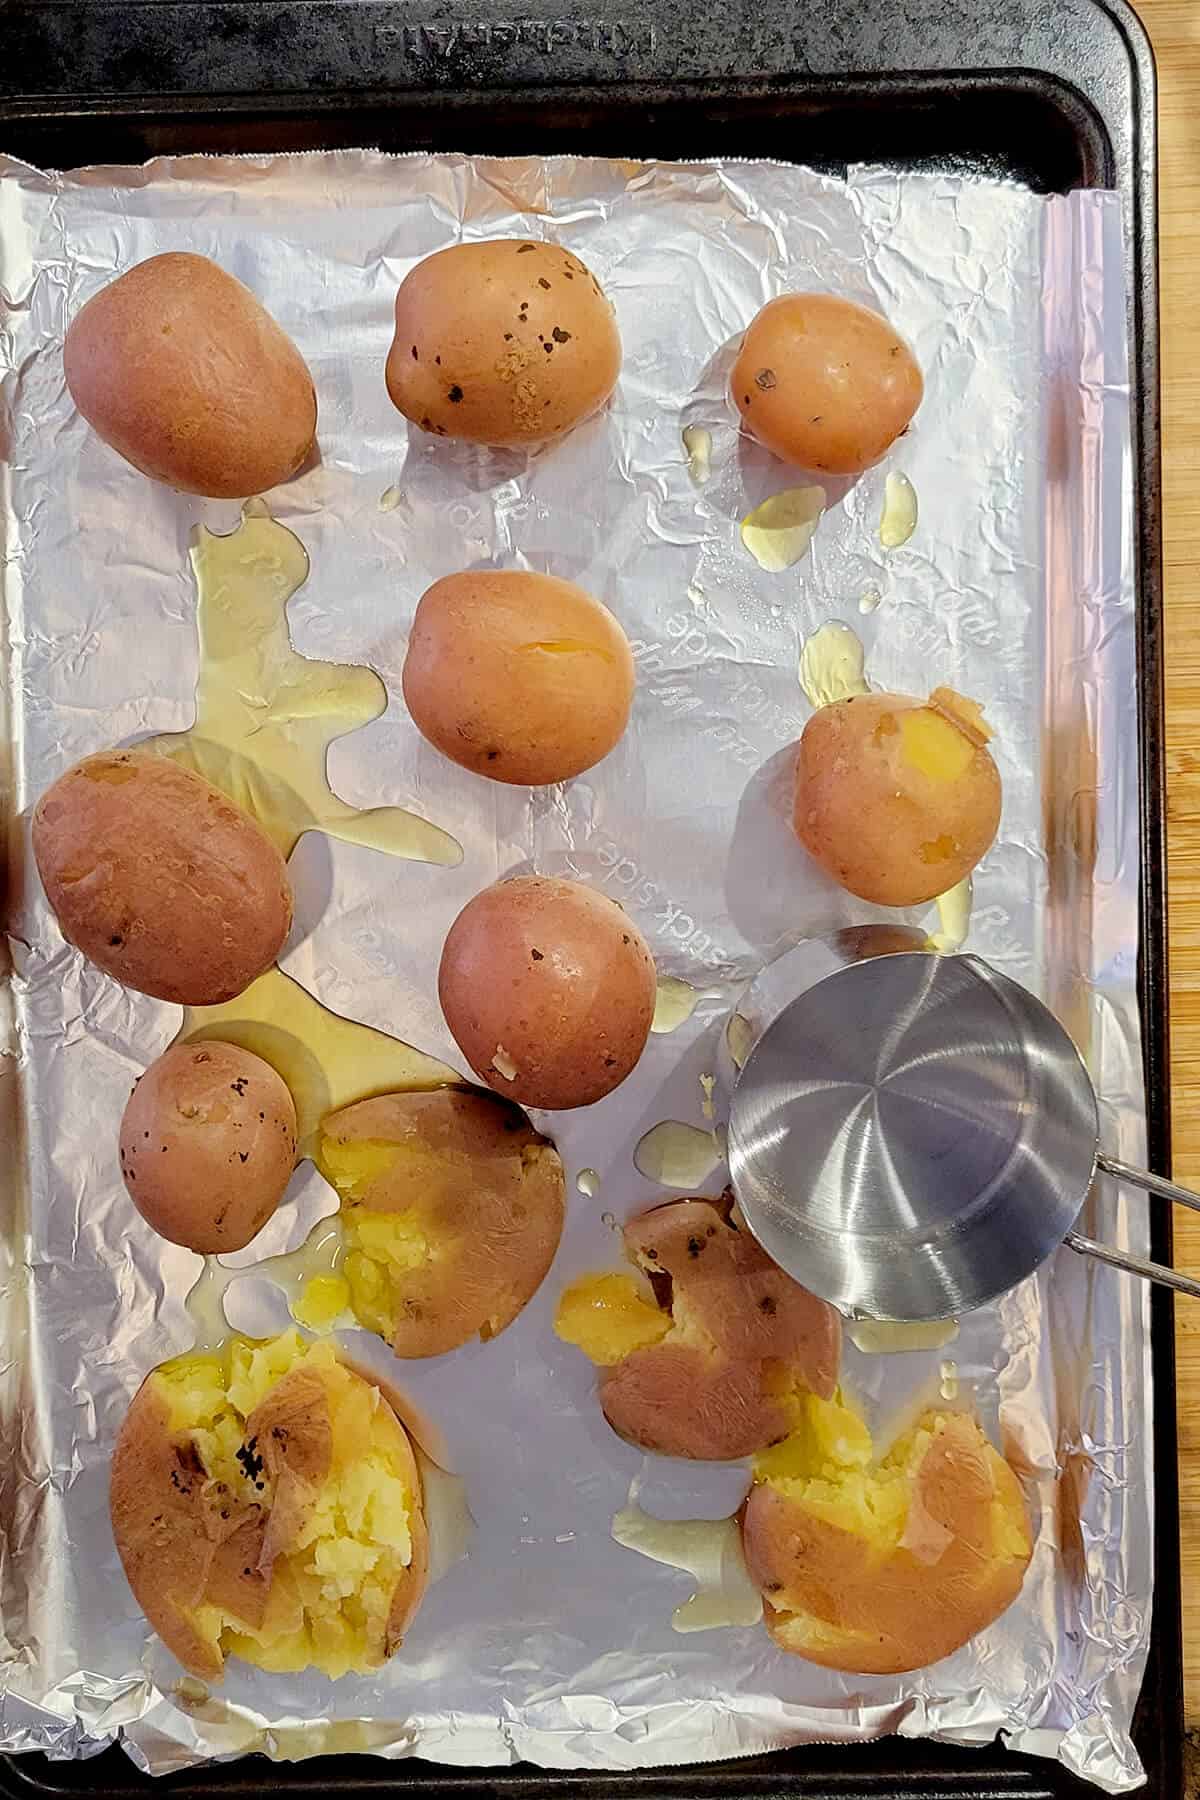 Potatoes and oil on baking sheet.